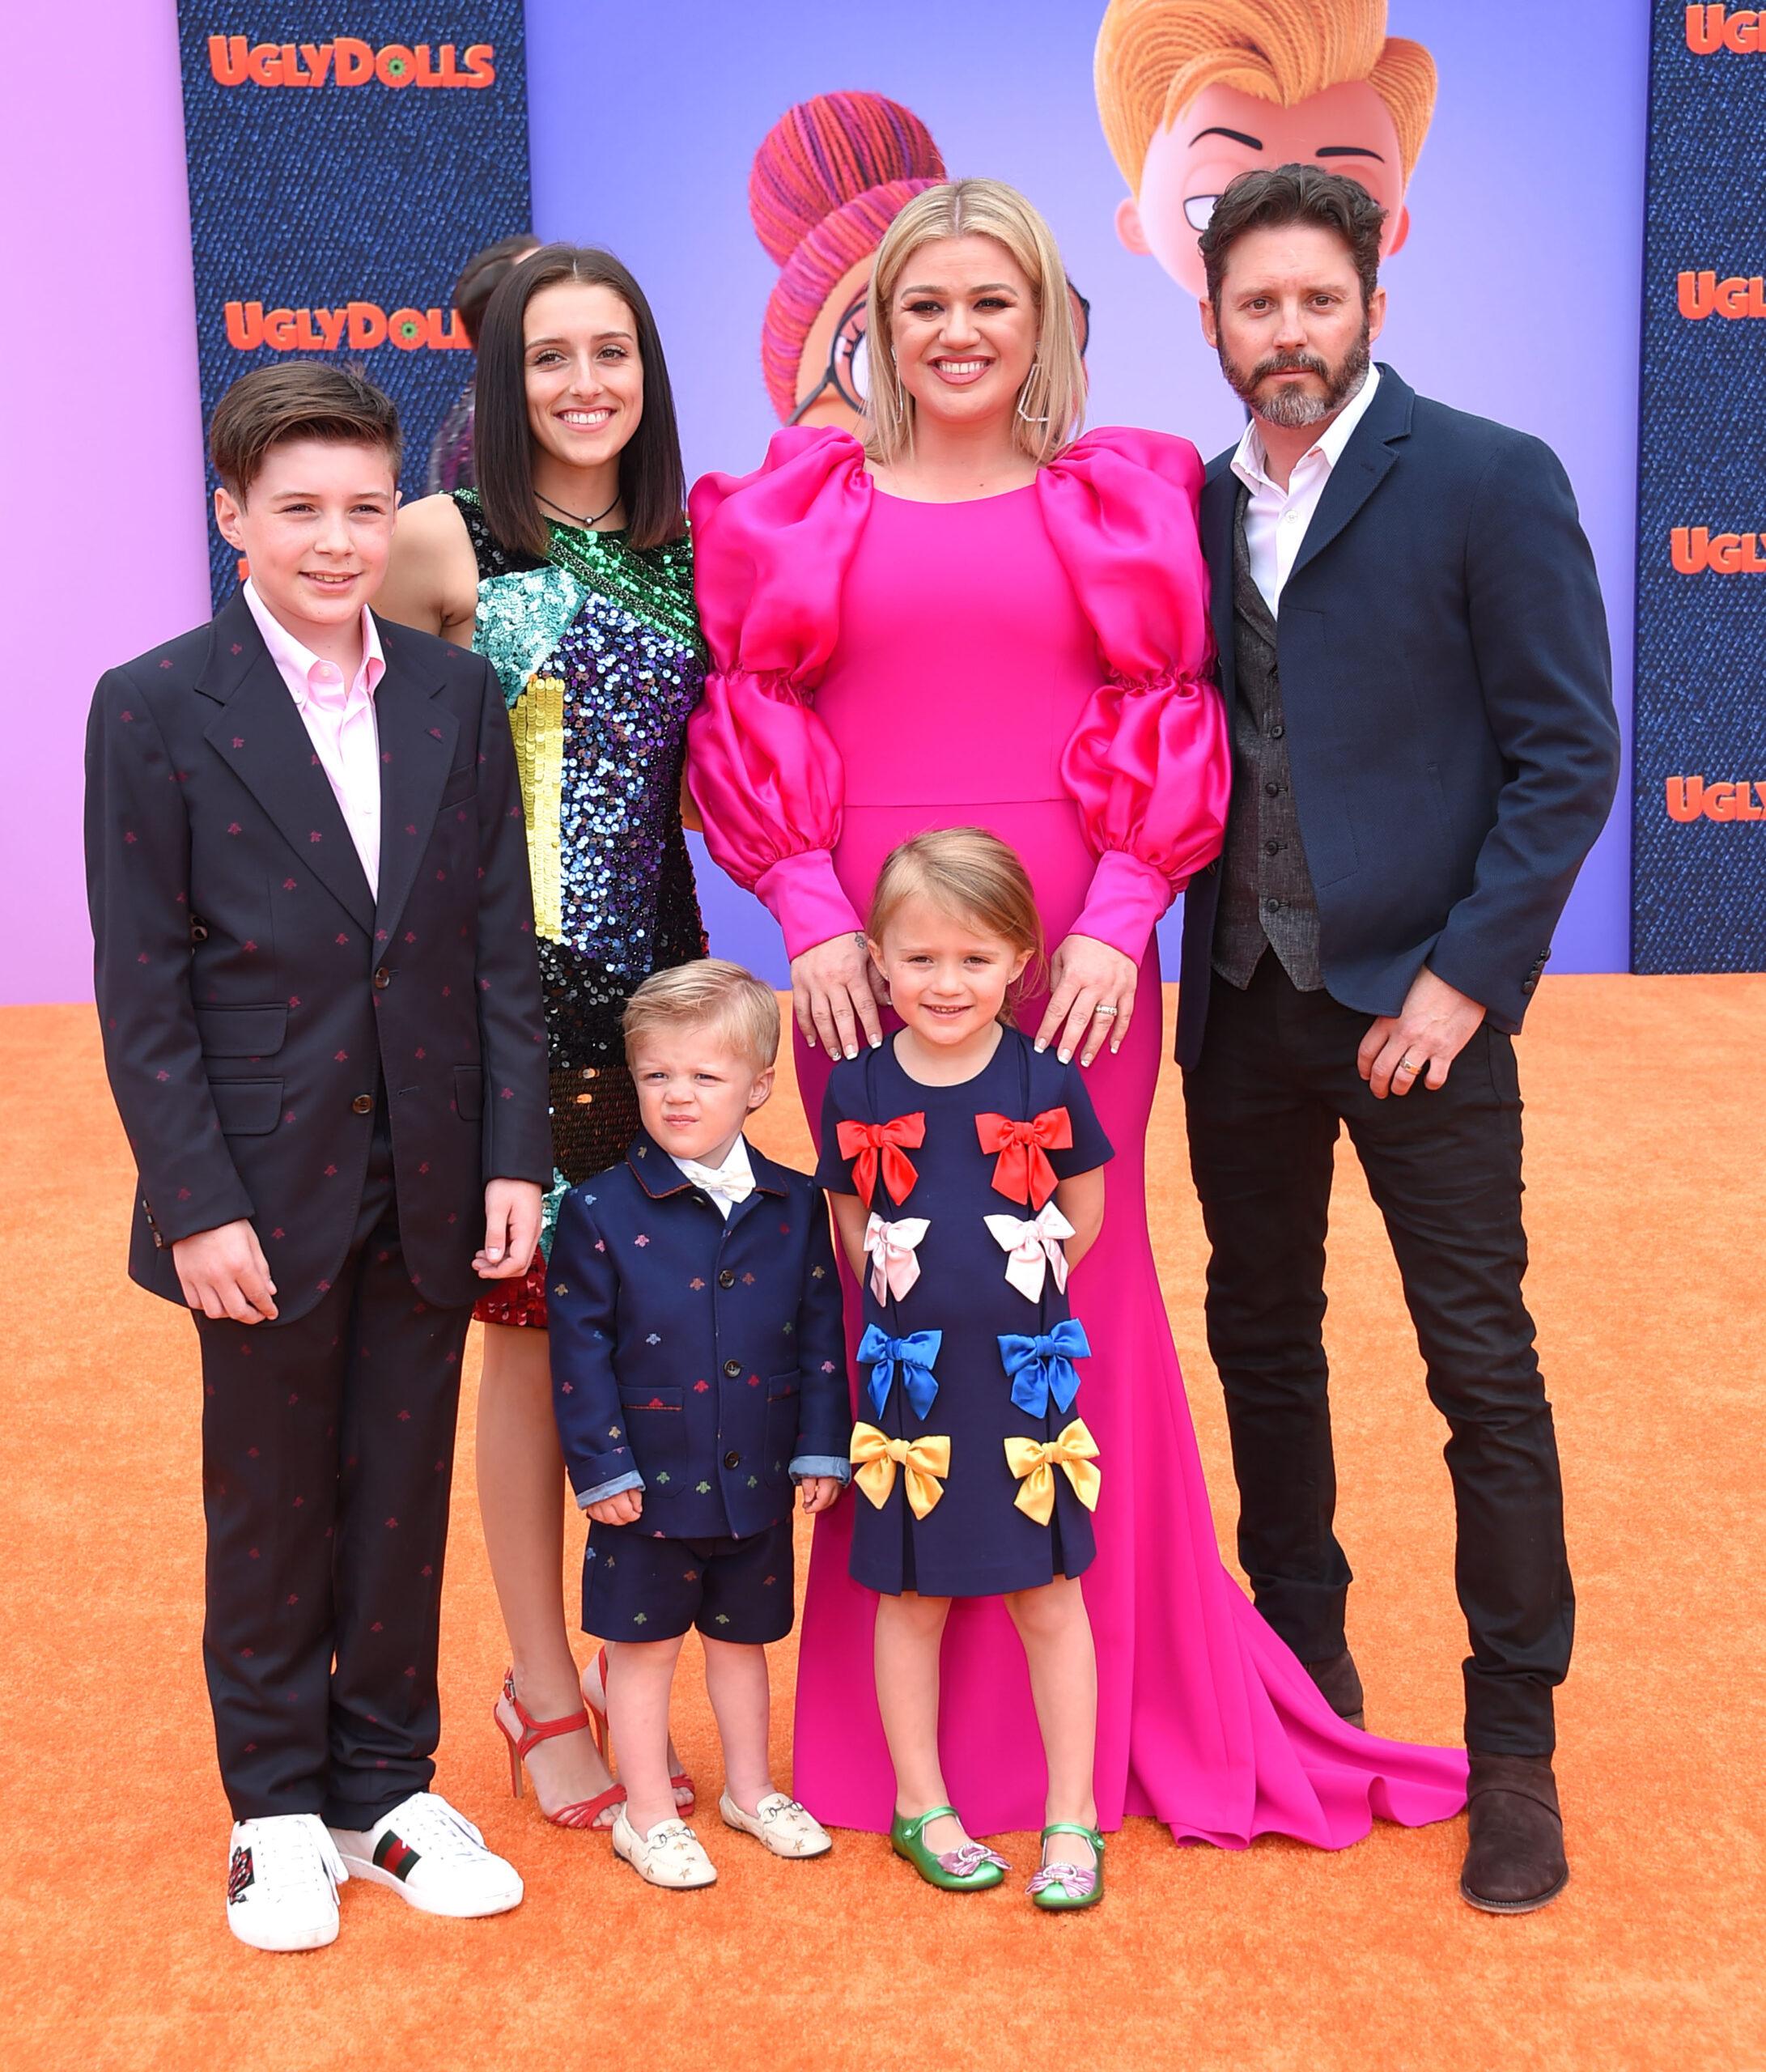 ‘The Voice’ Star Kelly Clarkson Says ‘I’ll Never Marry Again’ Following Nasty Divorce 